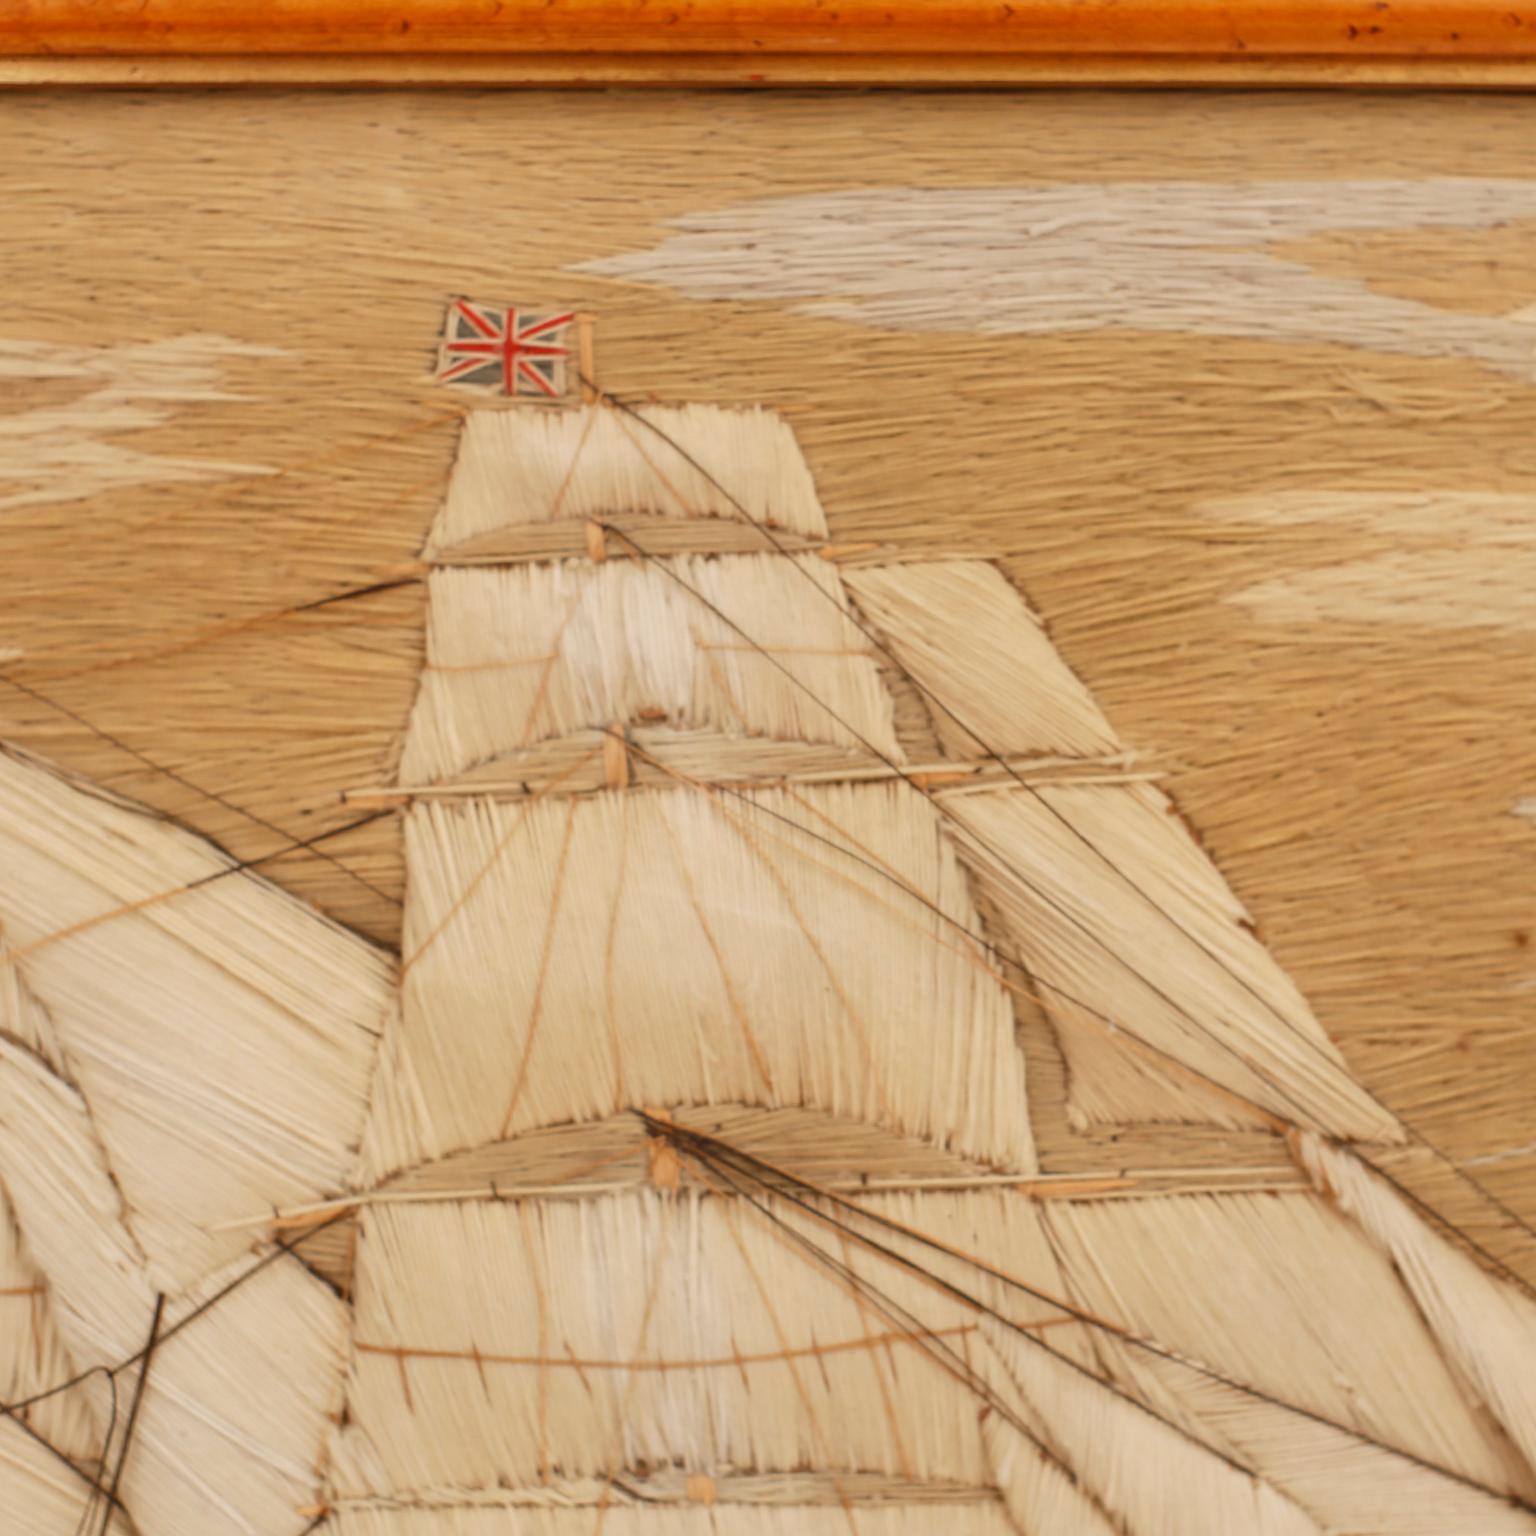 19th Century Wool Work 'Woolie' Needlepoint Embroidery of the British Ship Amelia For Sale